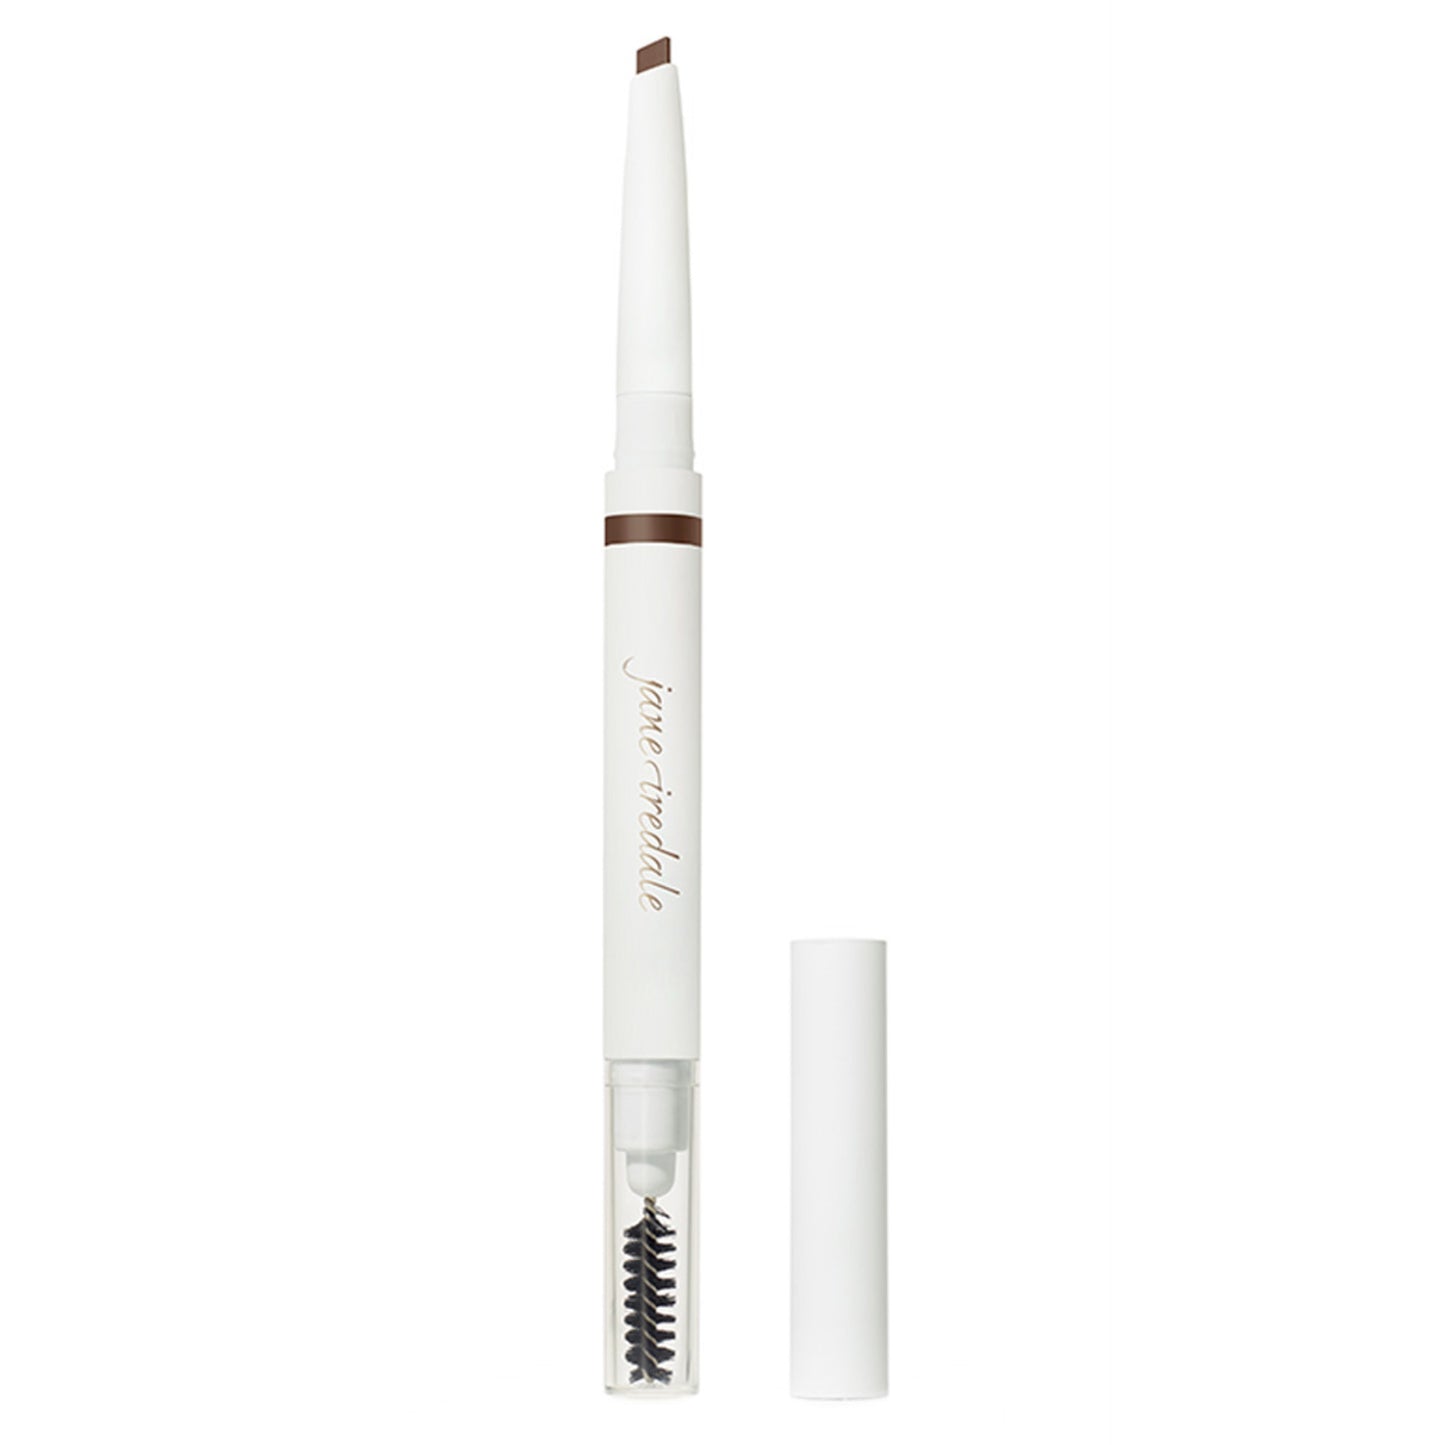 jane iredale PureBrow Shaping Pencil 1 piece